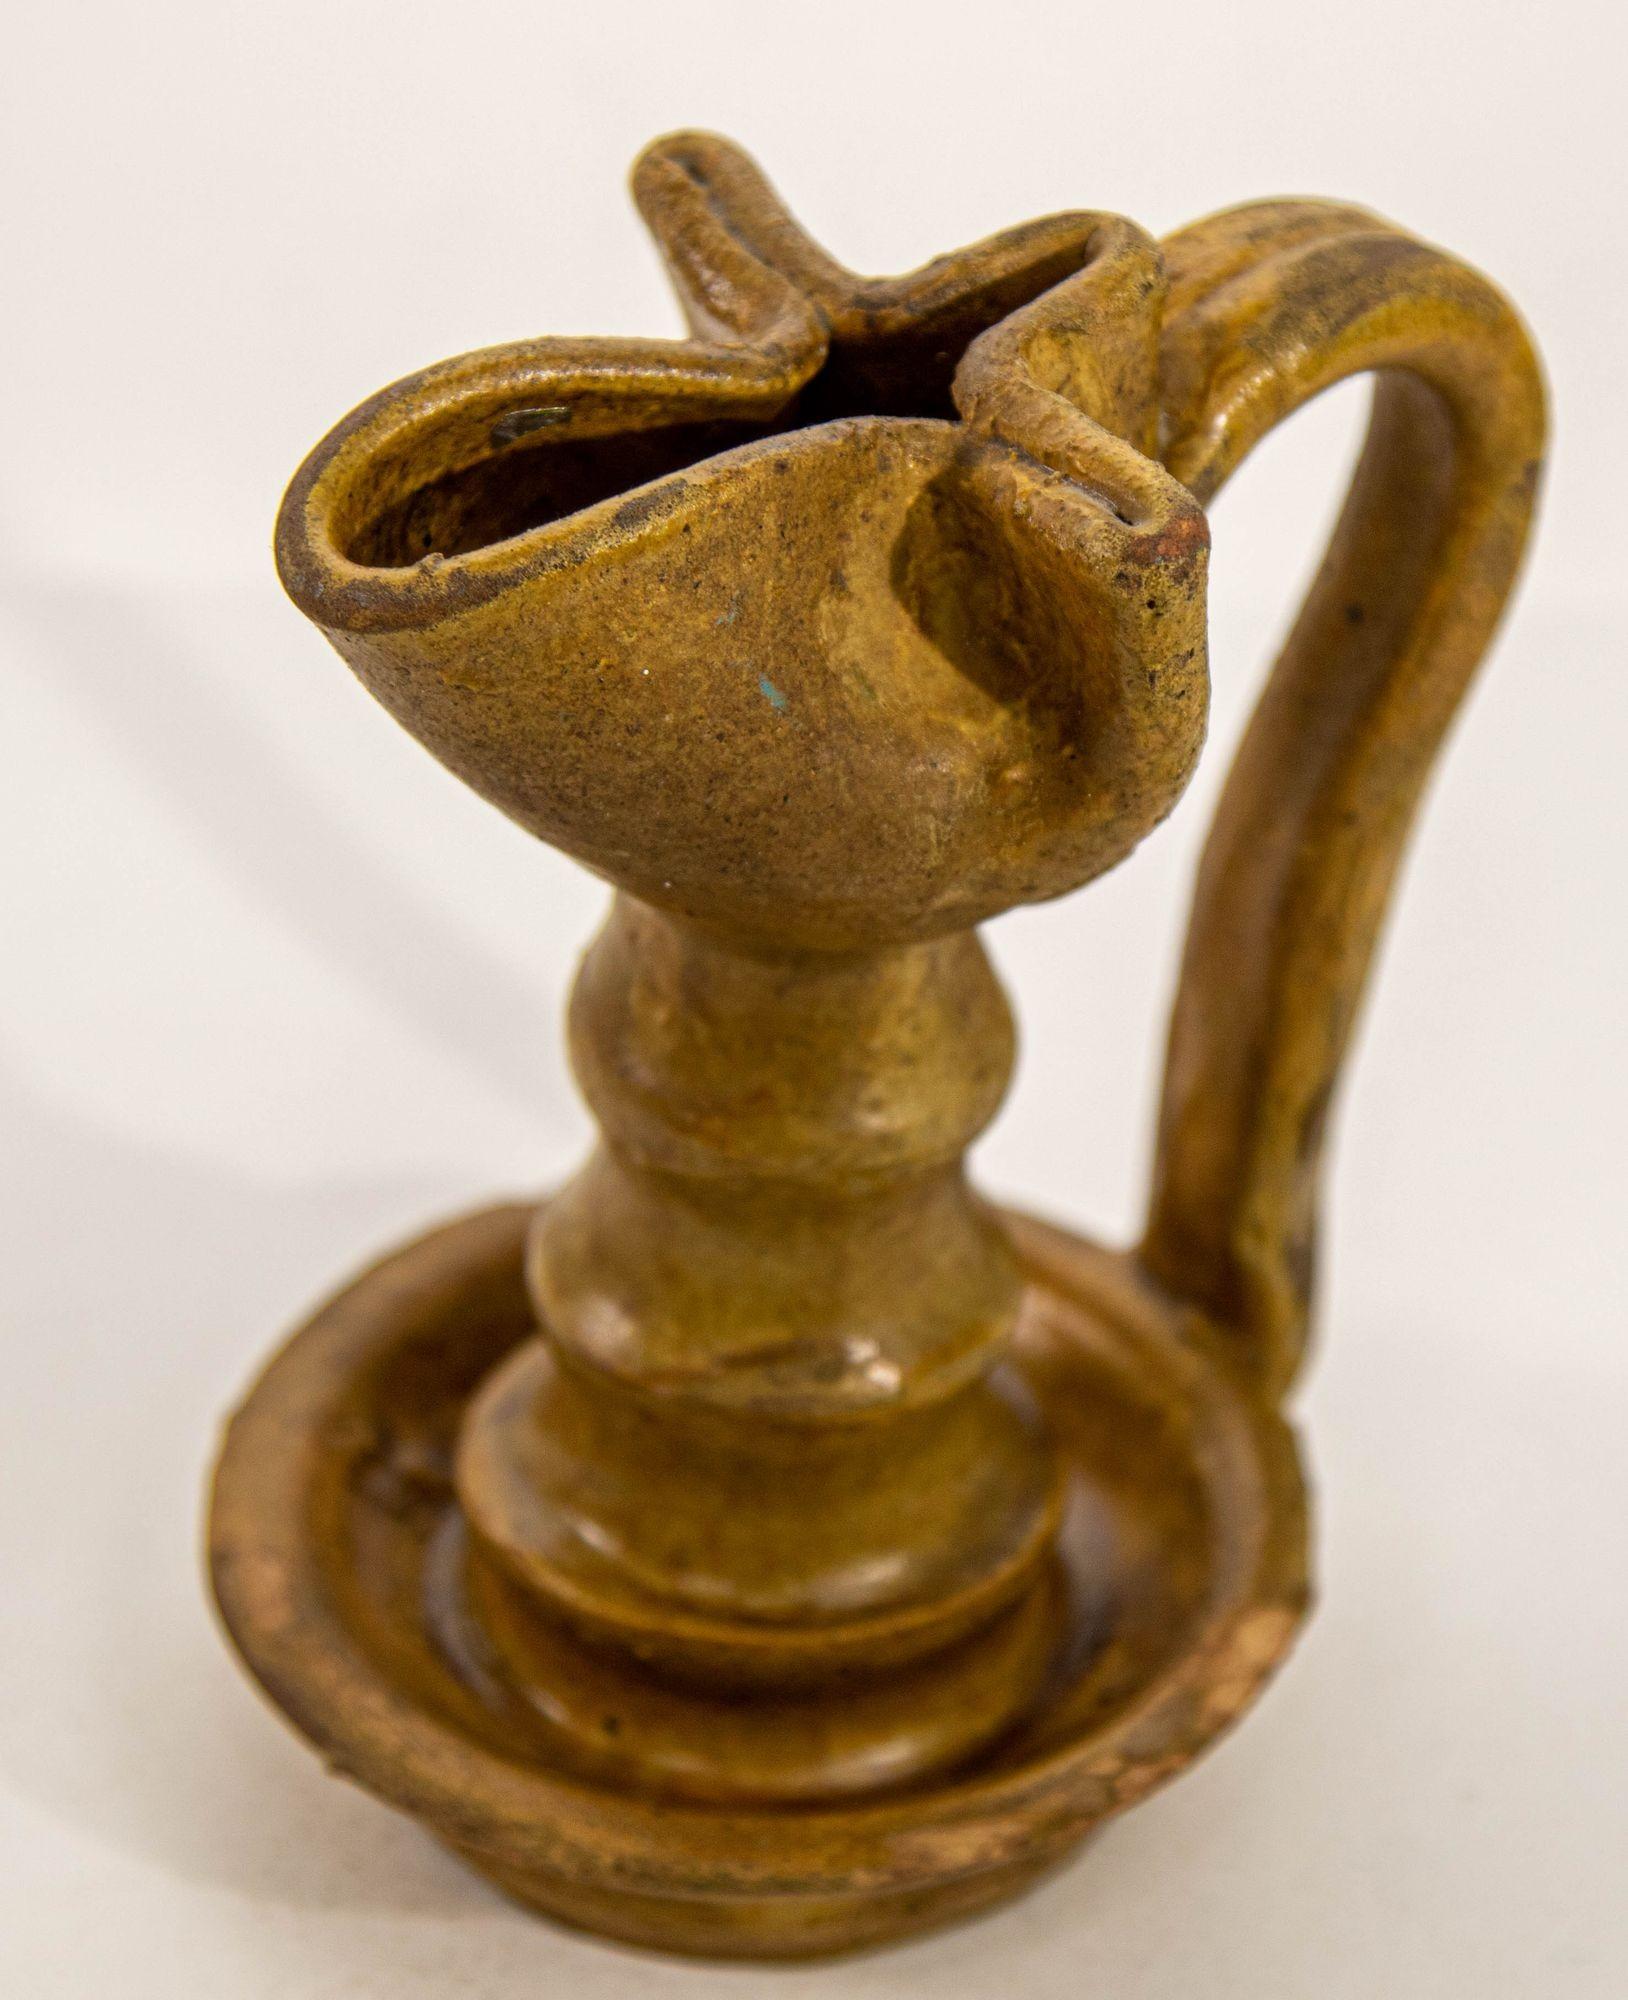 Antique Islamic Persian Nishapur style ceramic glazed oil lamp.
A stunning brown pottery oil lamp in the unique Nishapur style.
A pinched top bowl, with its narrow spout for a wick, sits atop a long, thin neck strap handle descends from top to